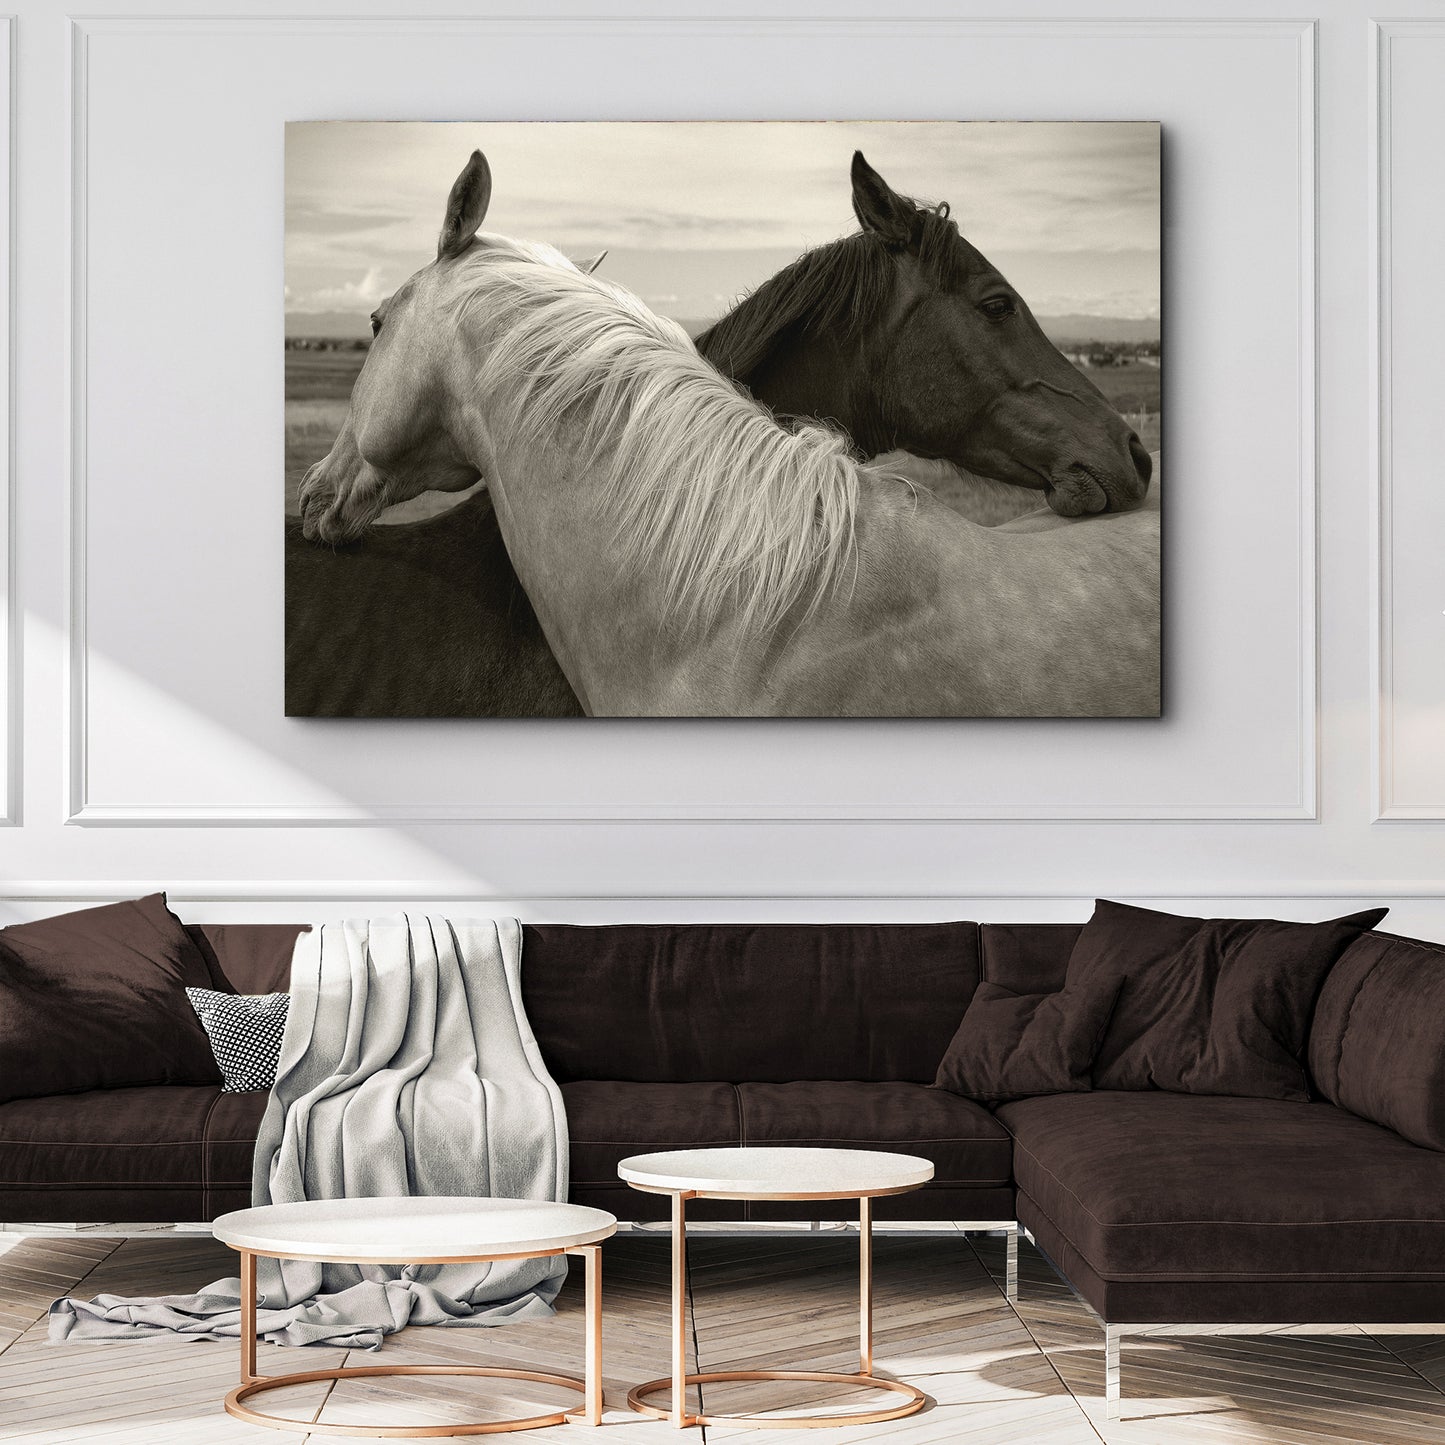 Monochrome Couple Horse Canvas Wall Art Style 2 - Image by Tailored Canvases